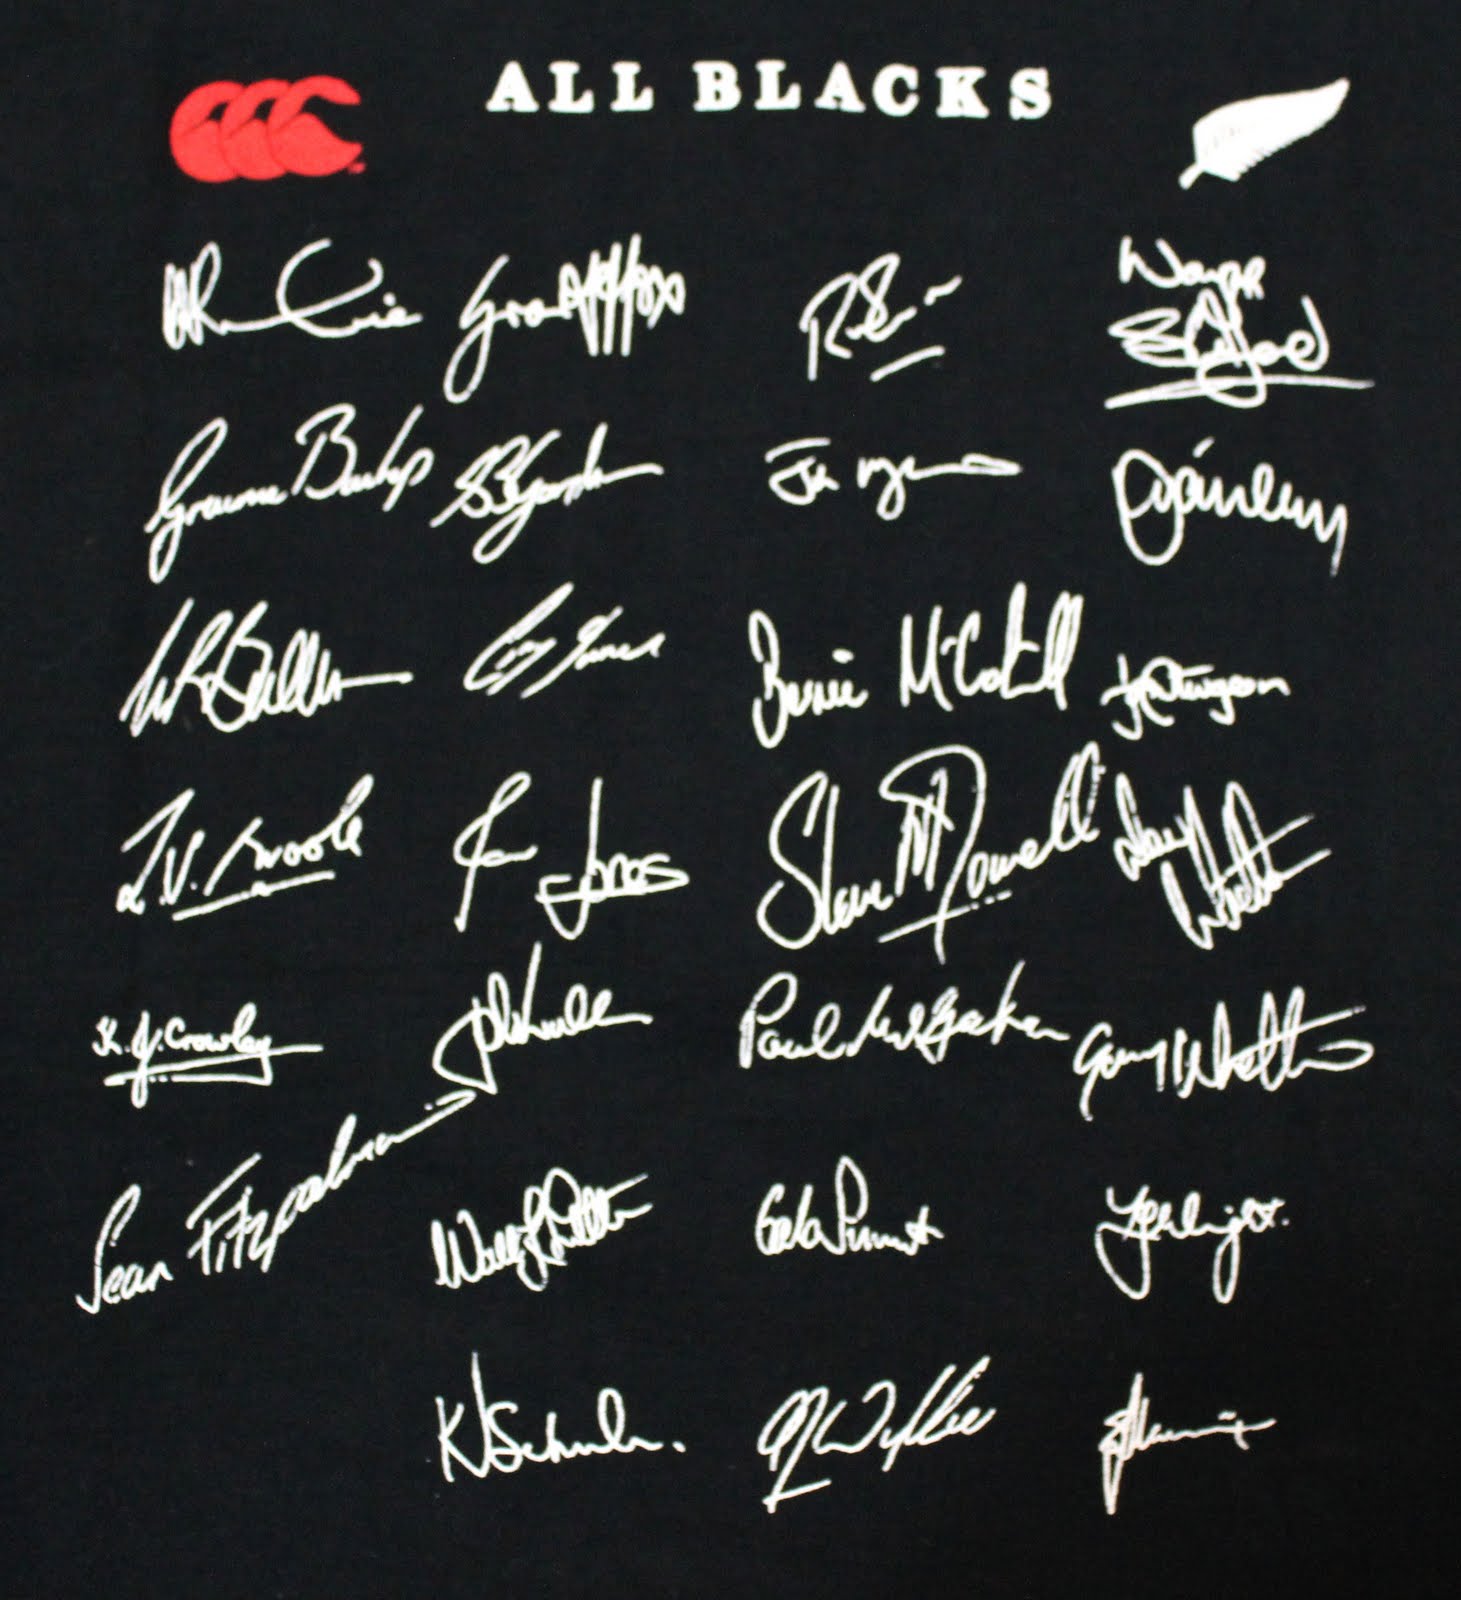 Retro One Rugby Boutique: New Zealand All Blacks Special Team ...